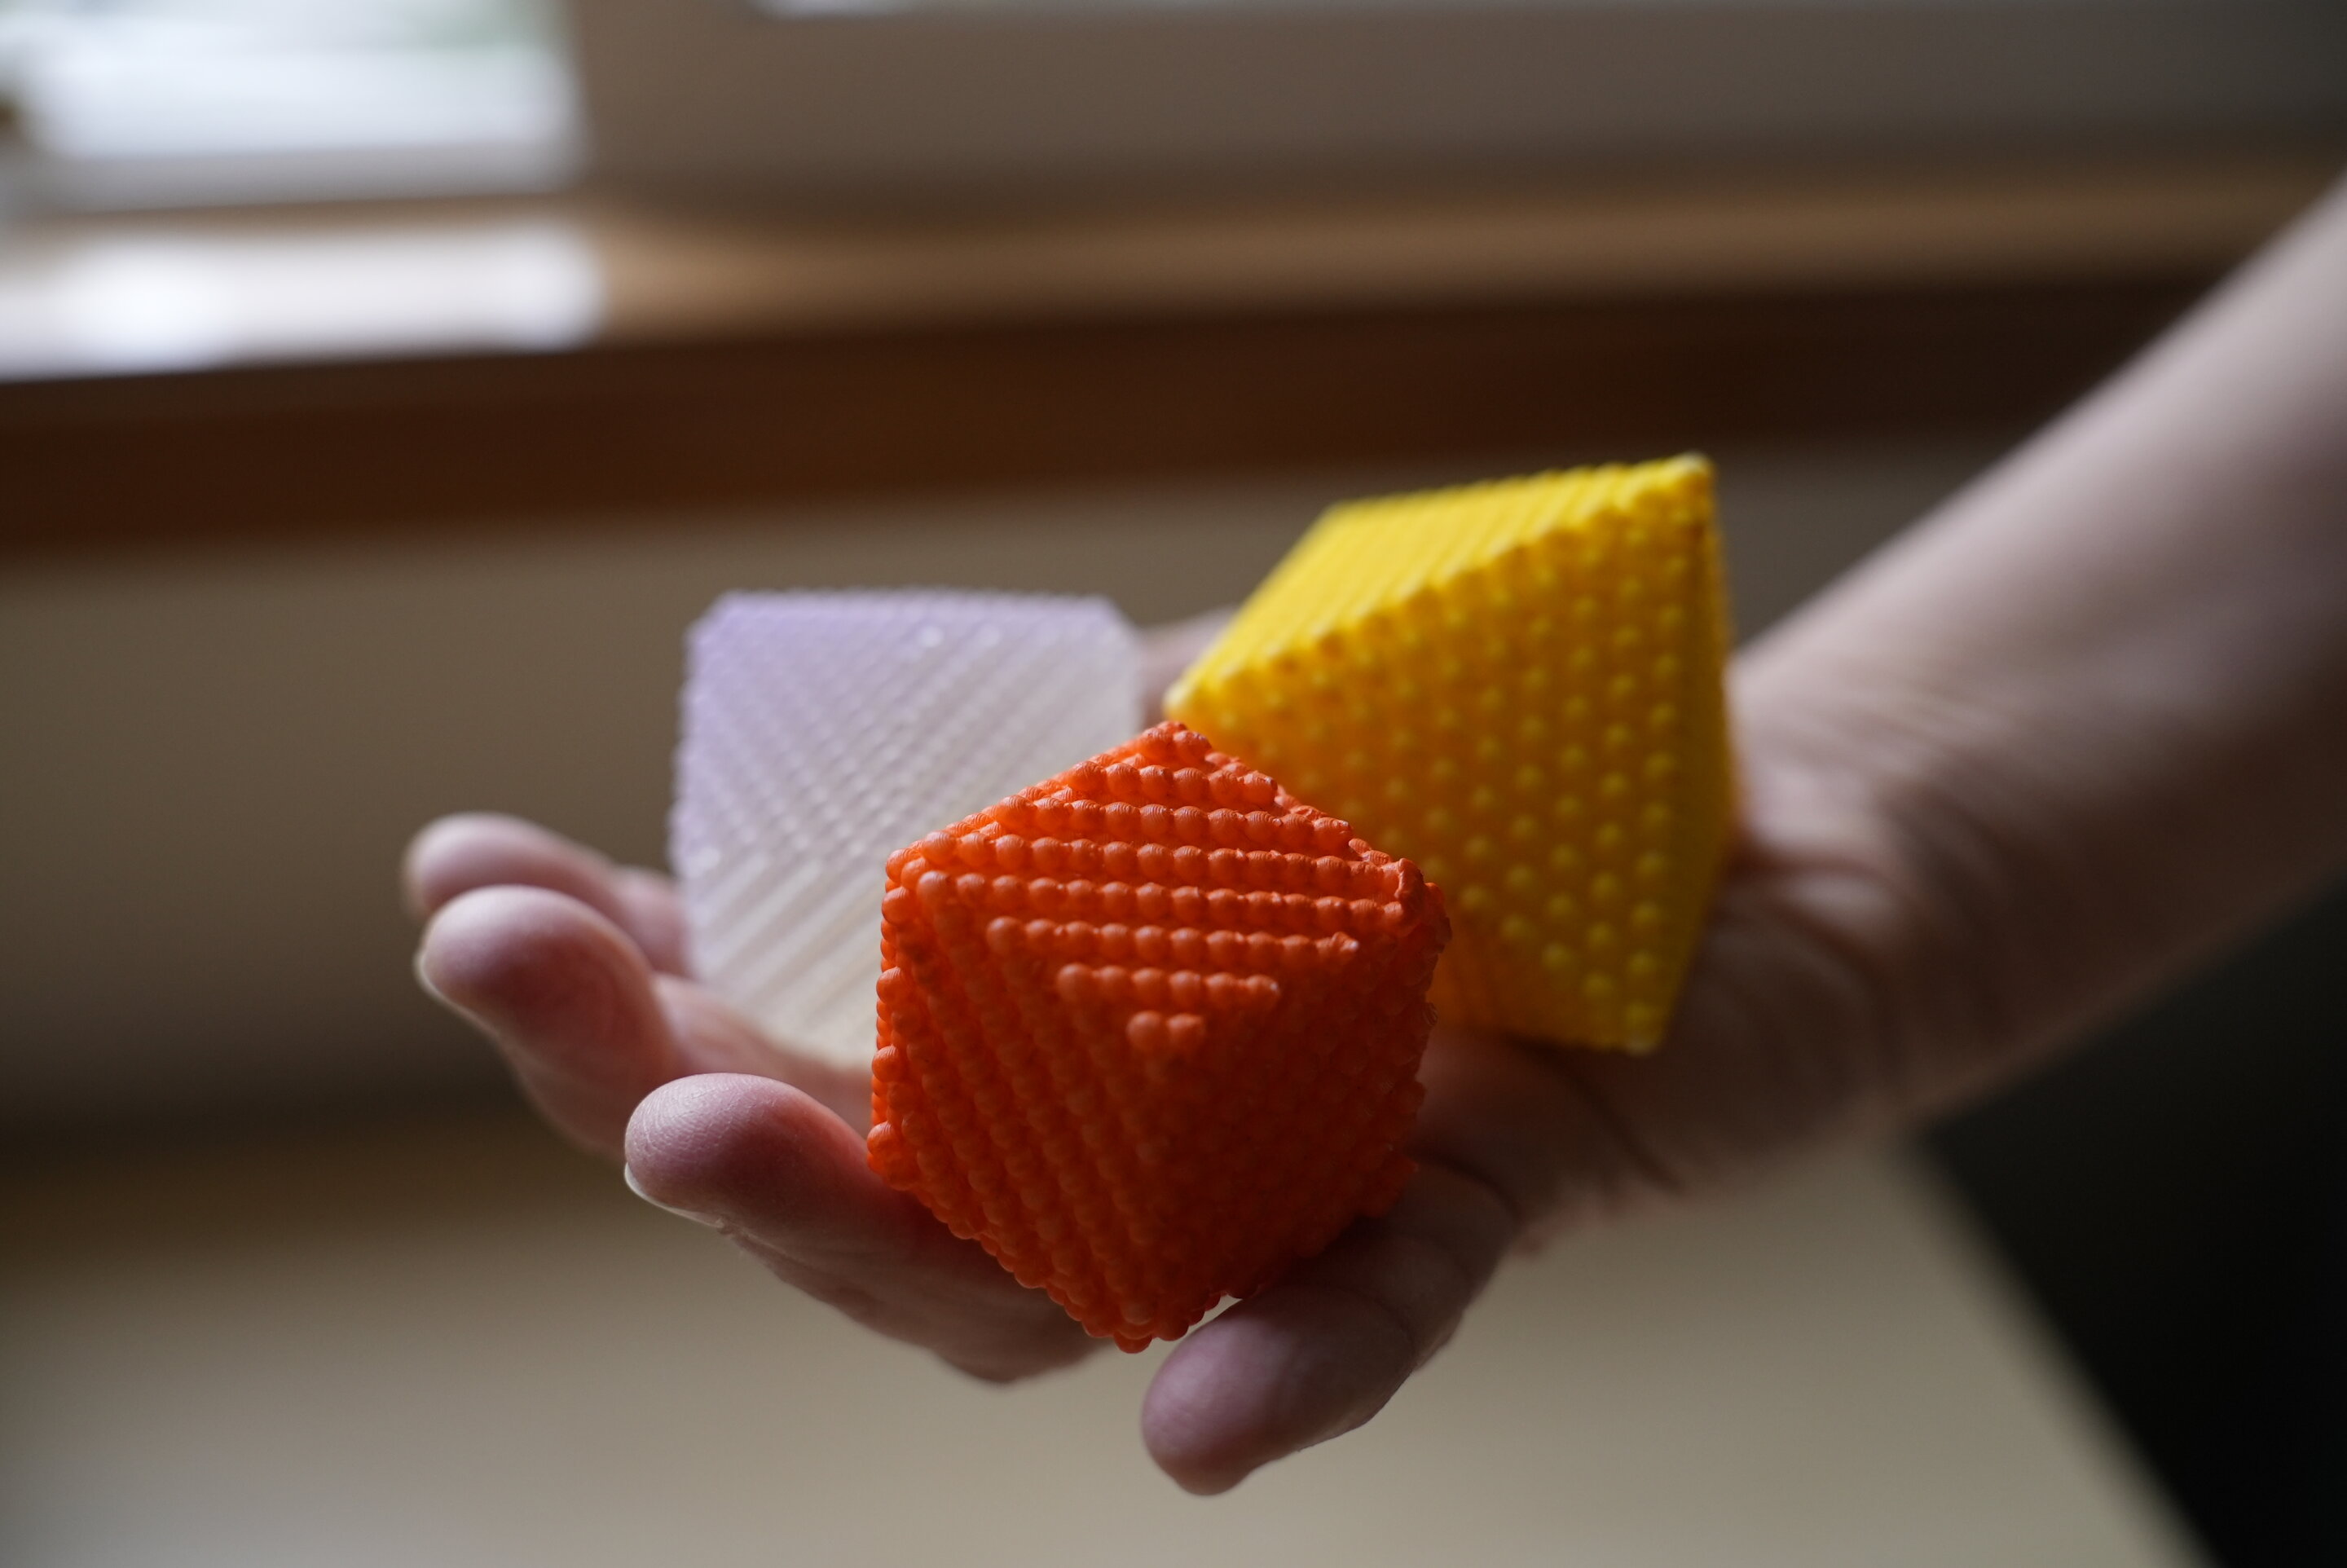 3D models for placing nanoparticles in the palm of your hand